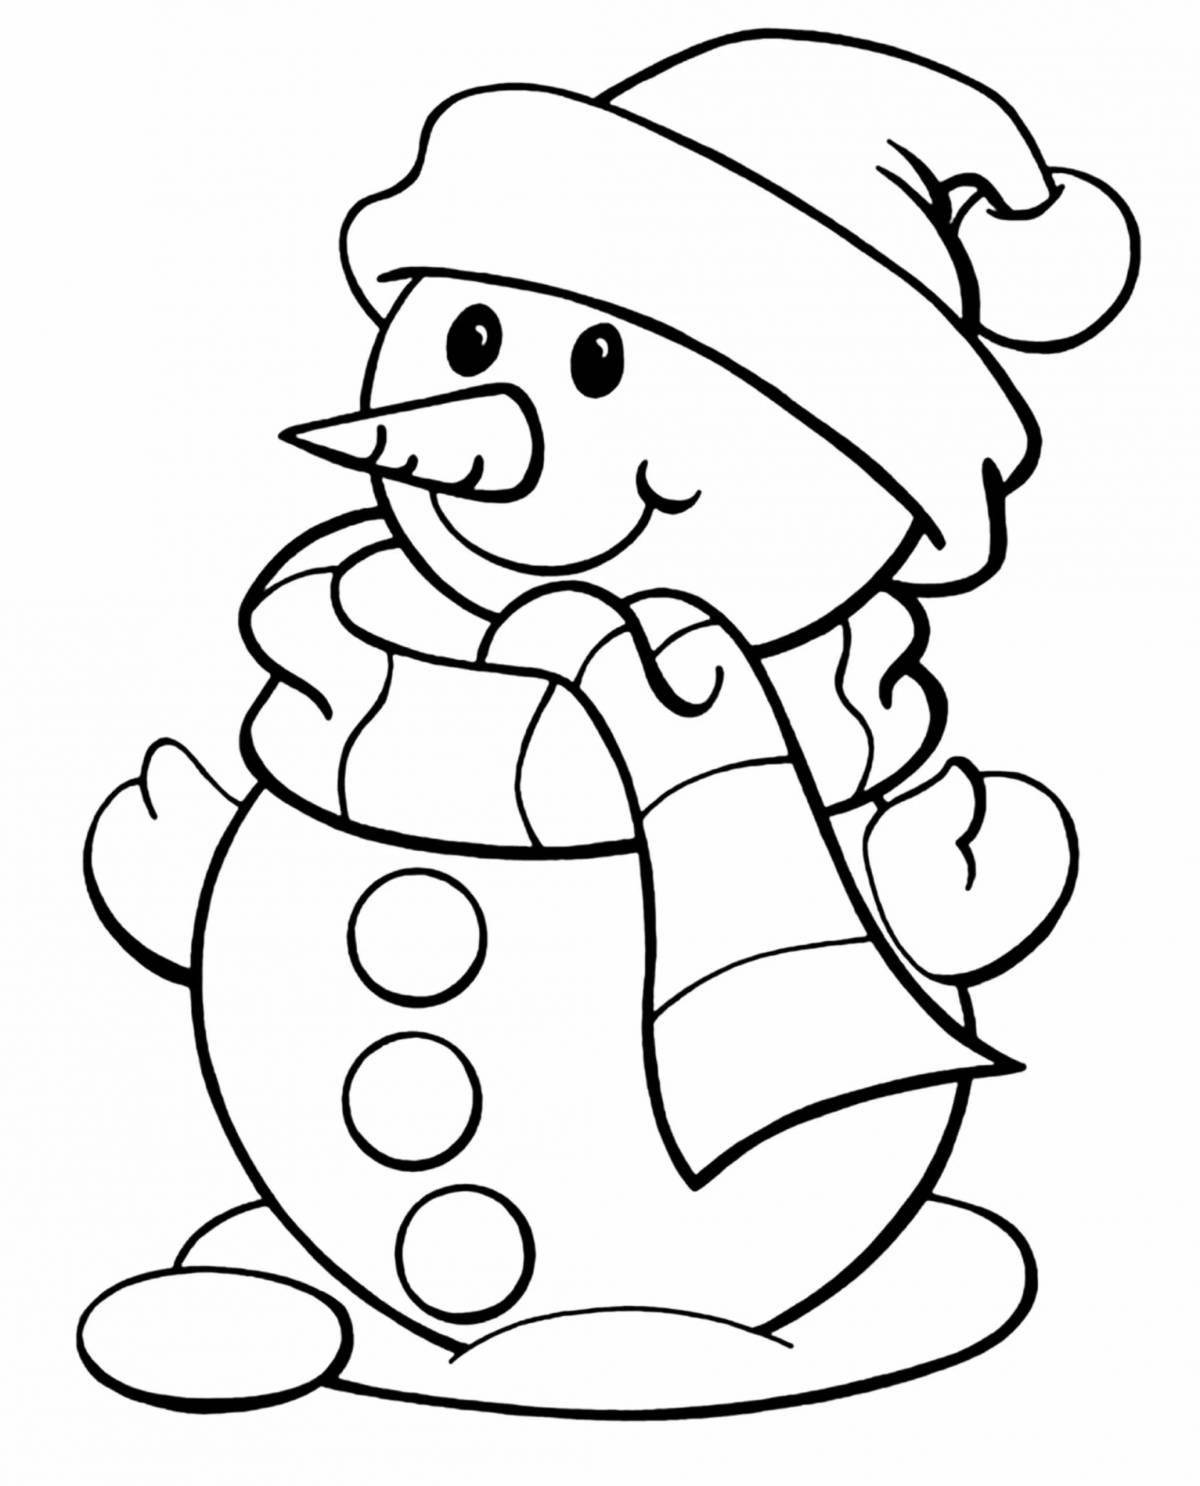 Great Christmas coloring book for kids 3-4 years old